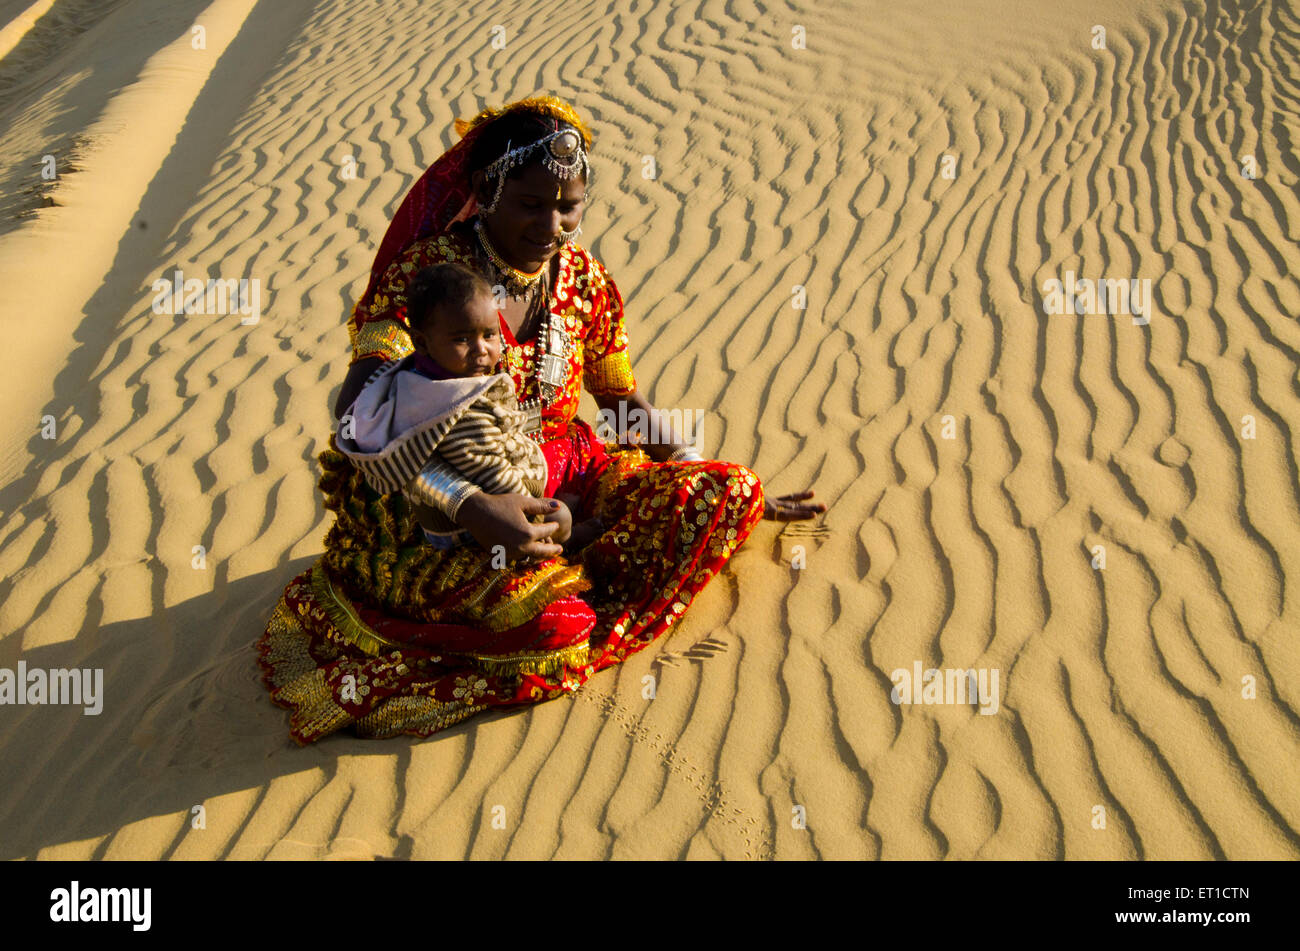 Woman with Son in Her Lap Sitting On Sand Dune Thar Desert Jaisalmer Rajasthan India   MR # 704 Stock Photo